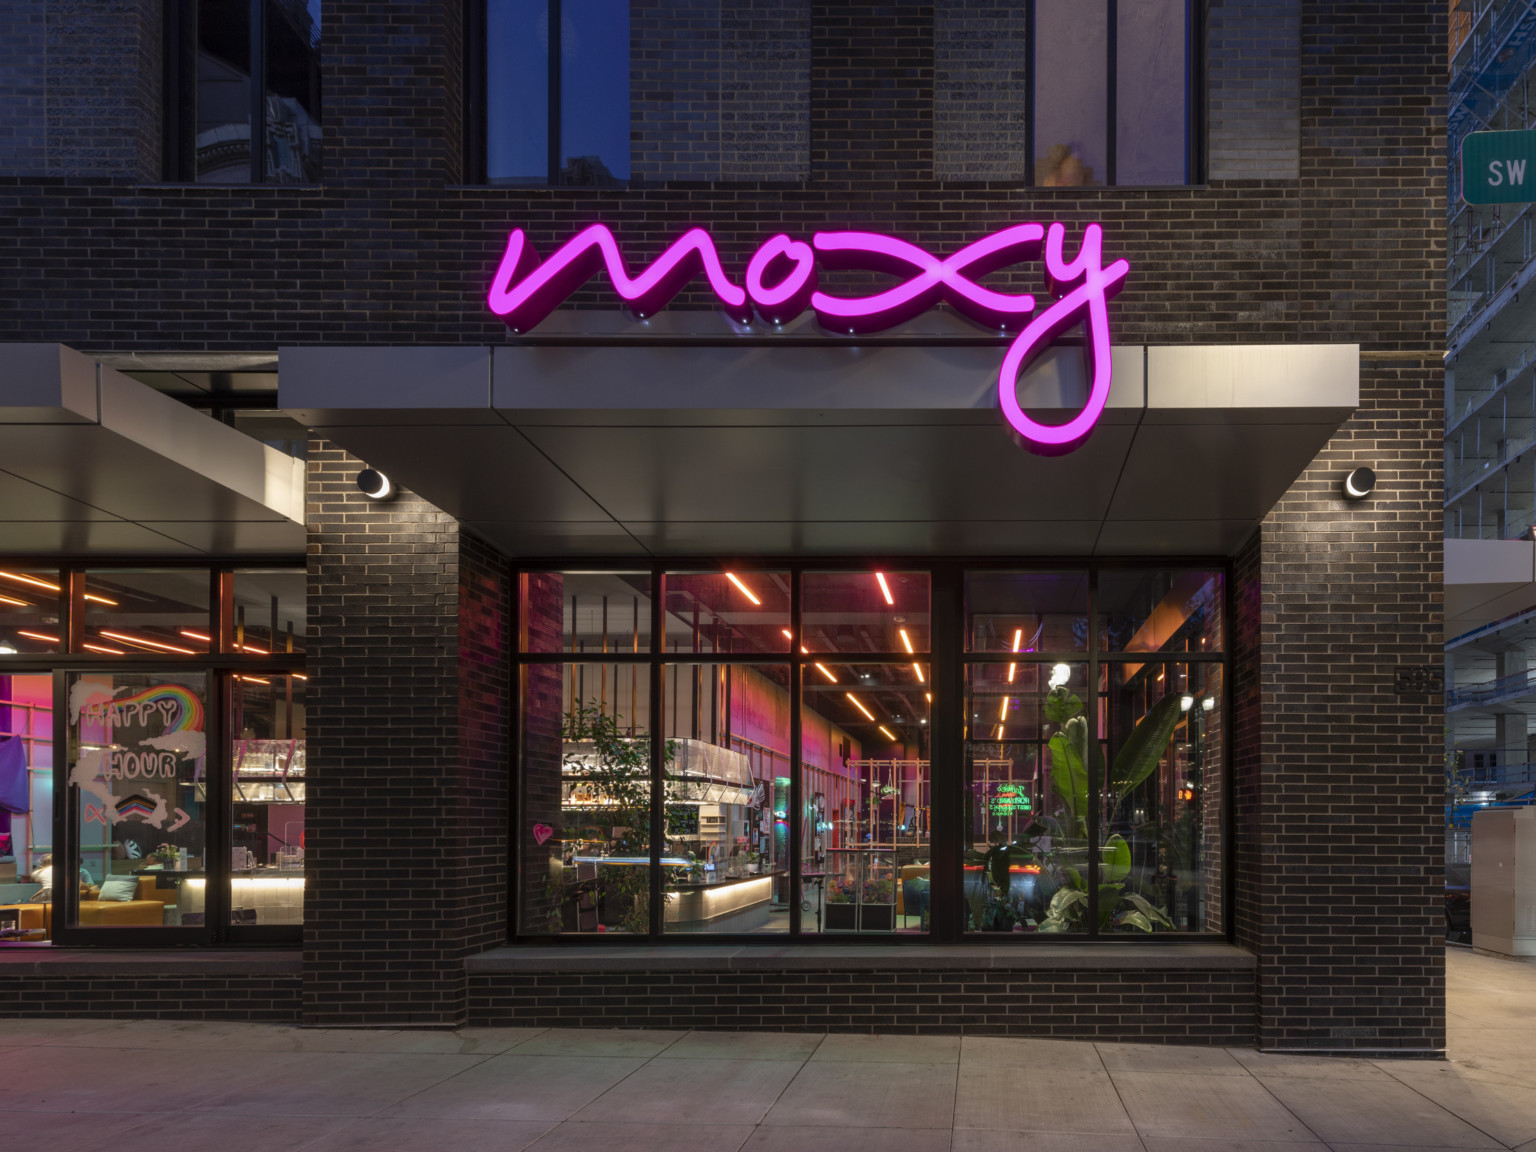 Exterior view from ground level corner at night, coffee shop can be seen inside through windows. Moxy pink sign illuminated